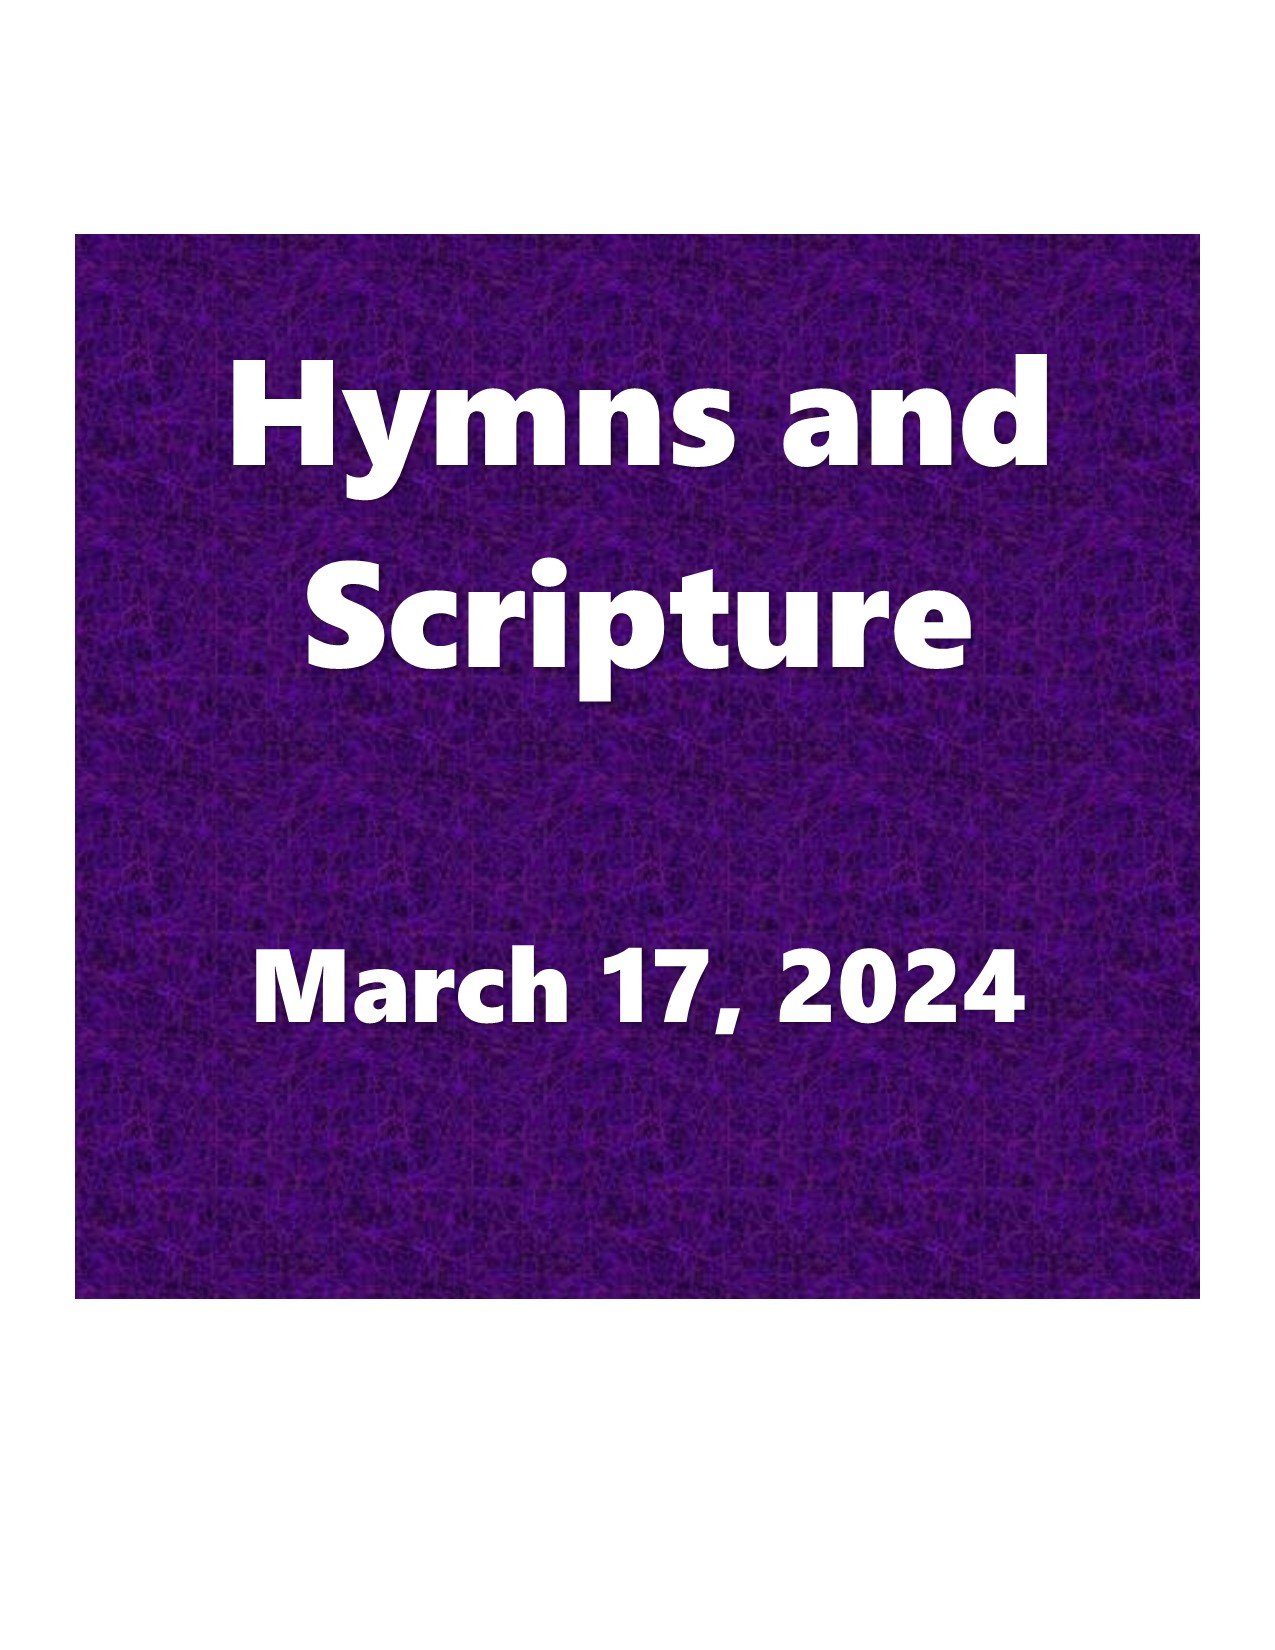 a Button - Hymns and Scripture March 17, 2024 .jpg